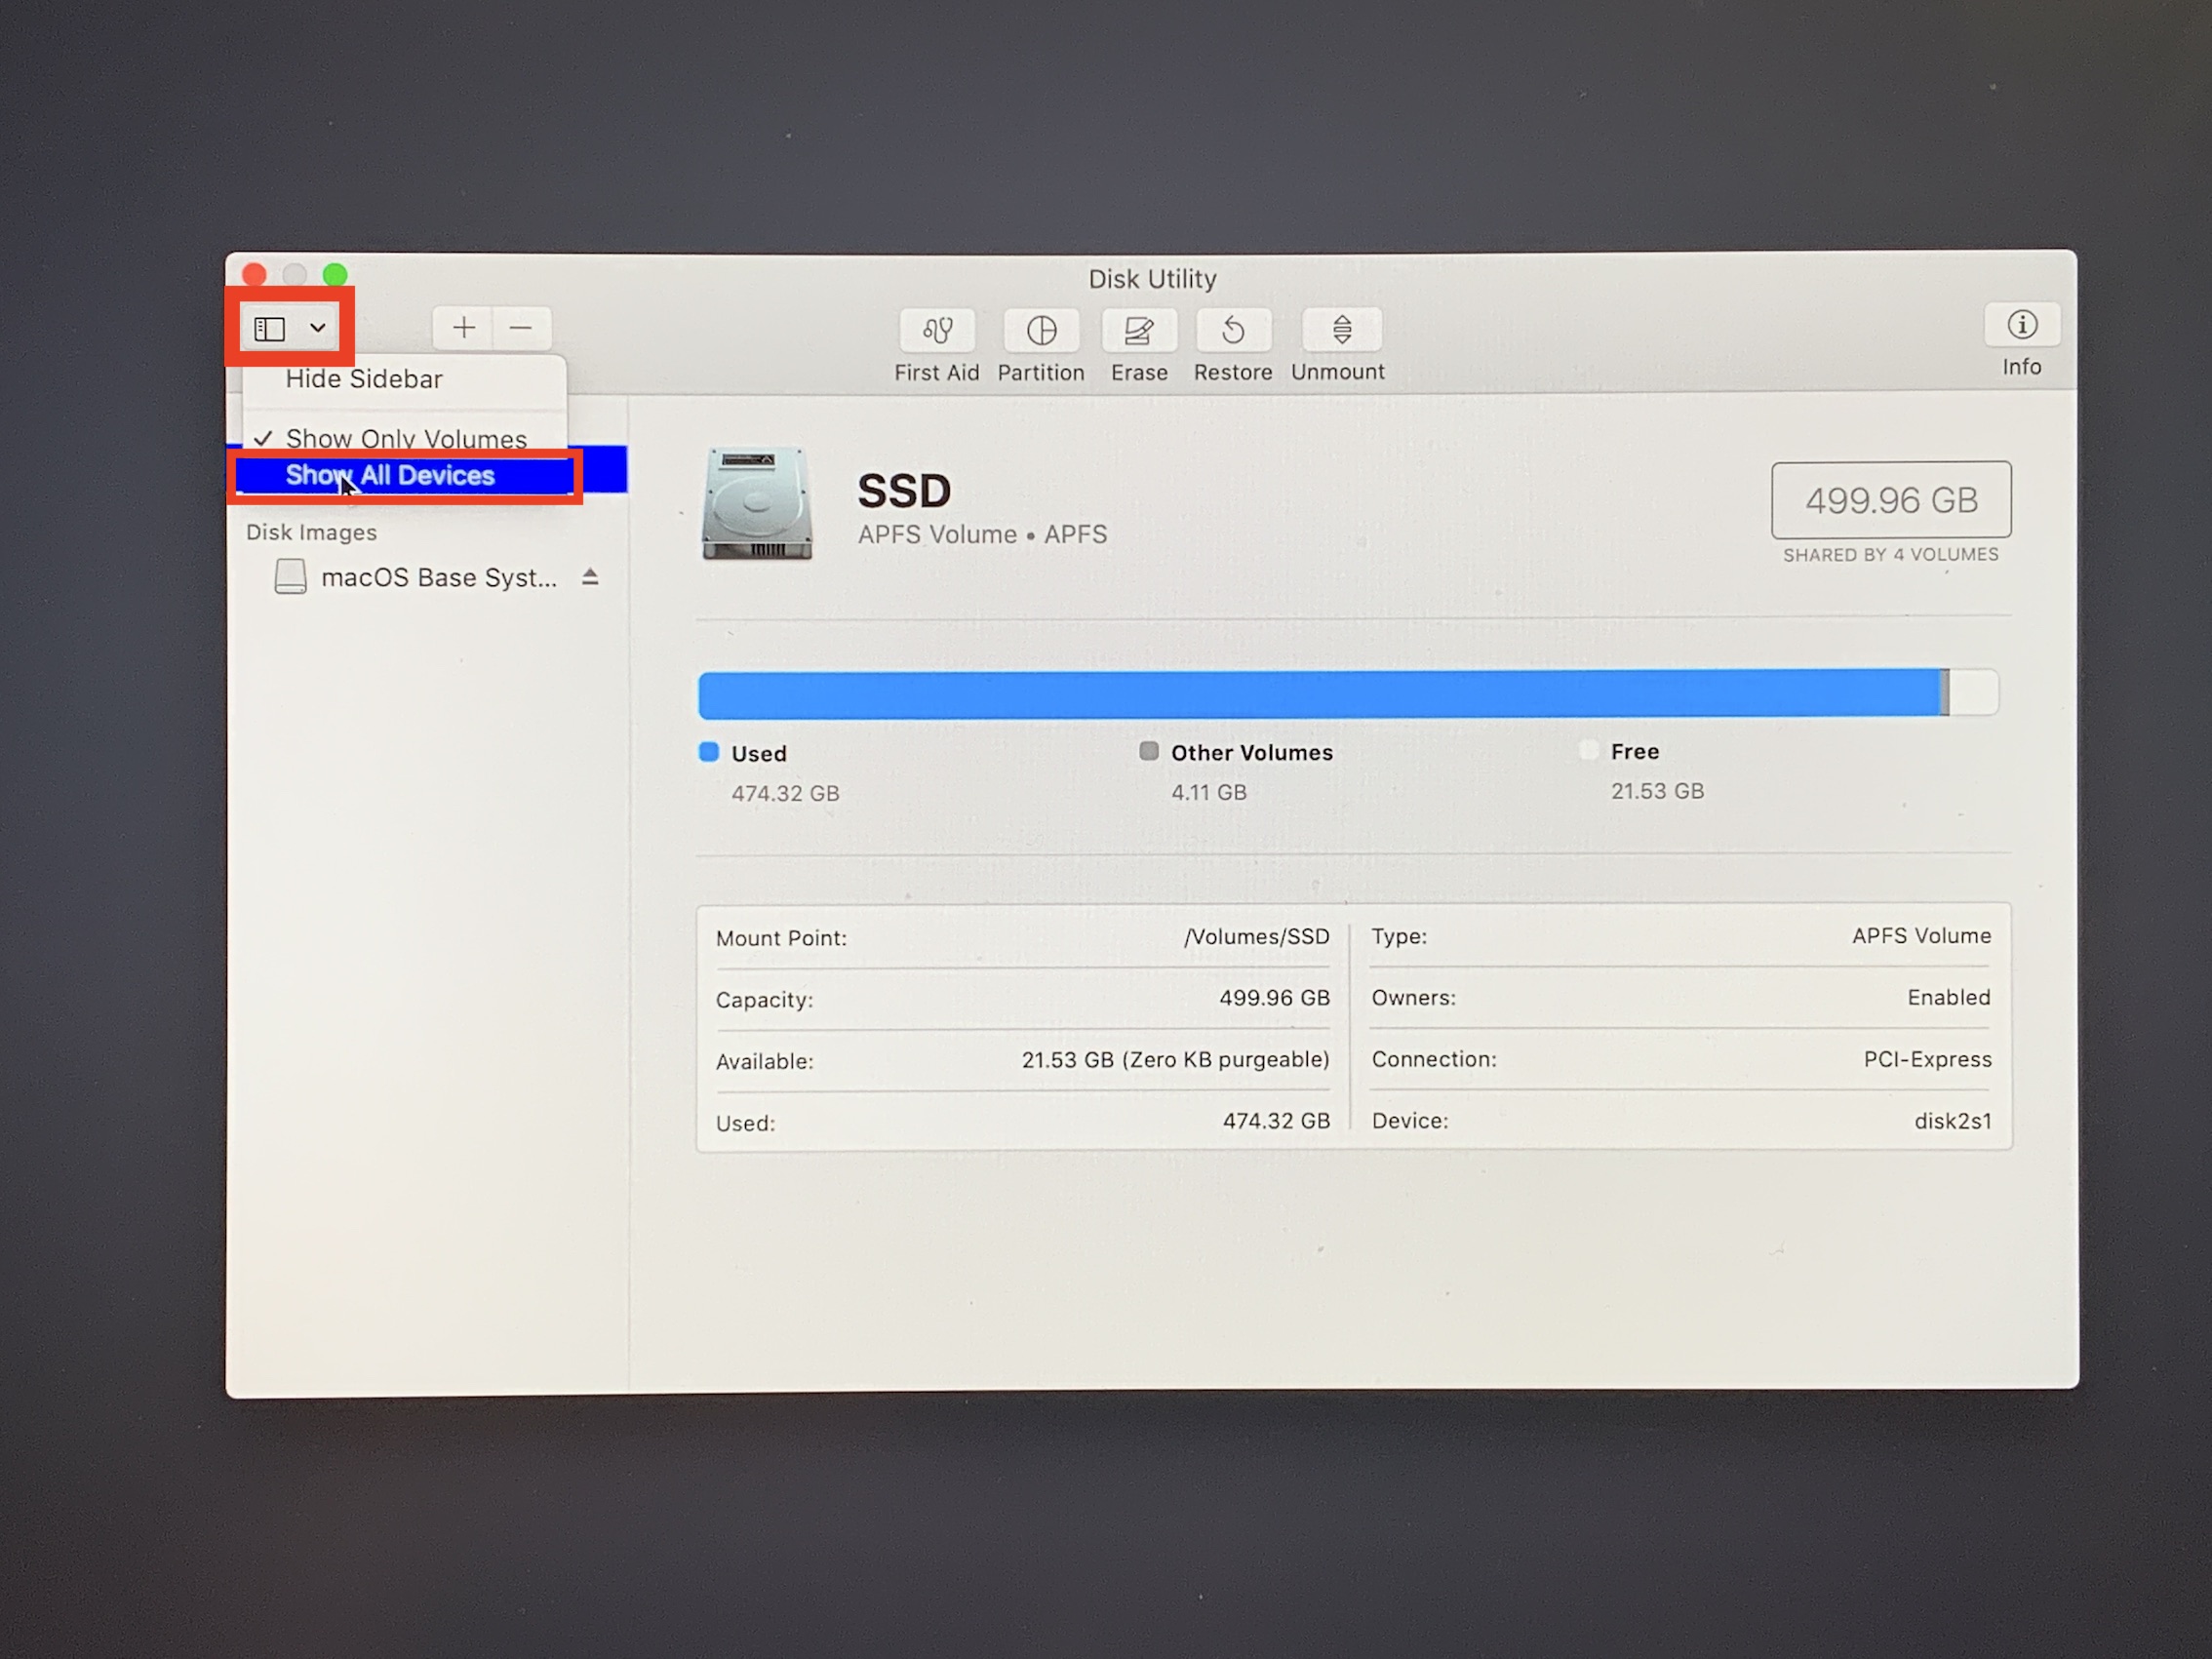 restore your mac from a backup